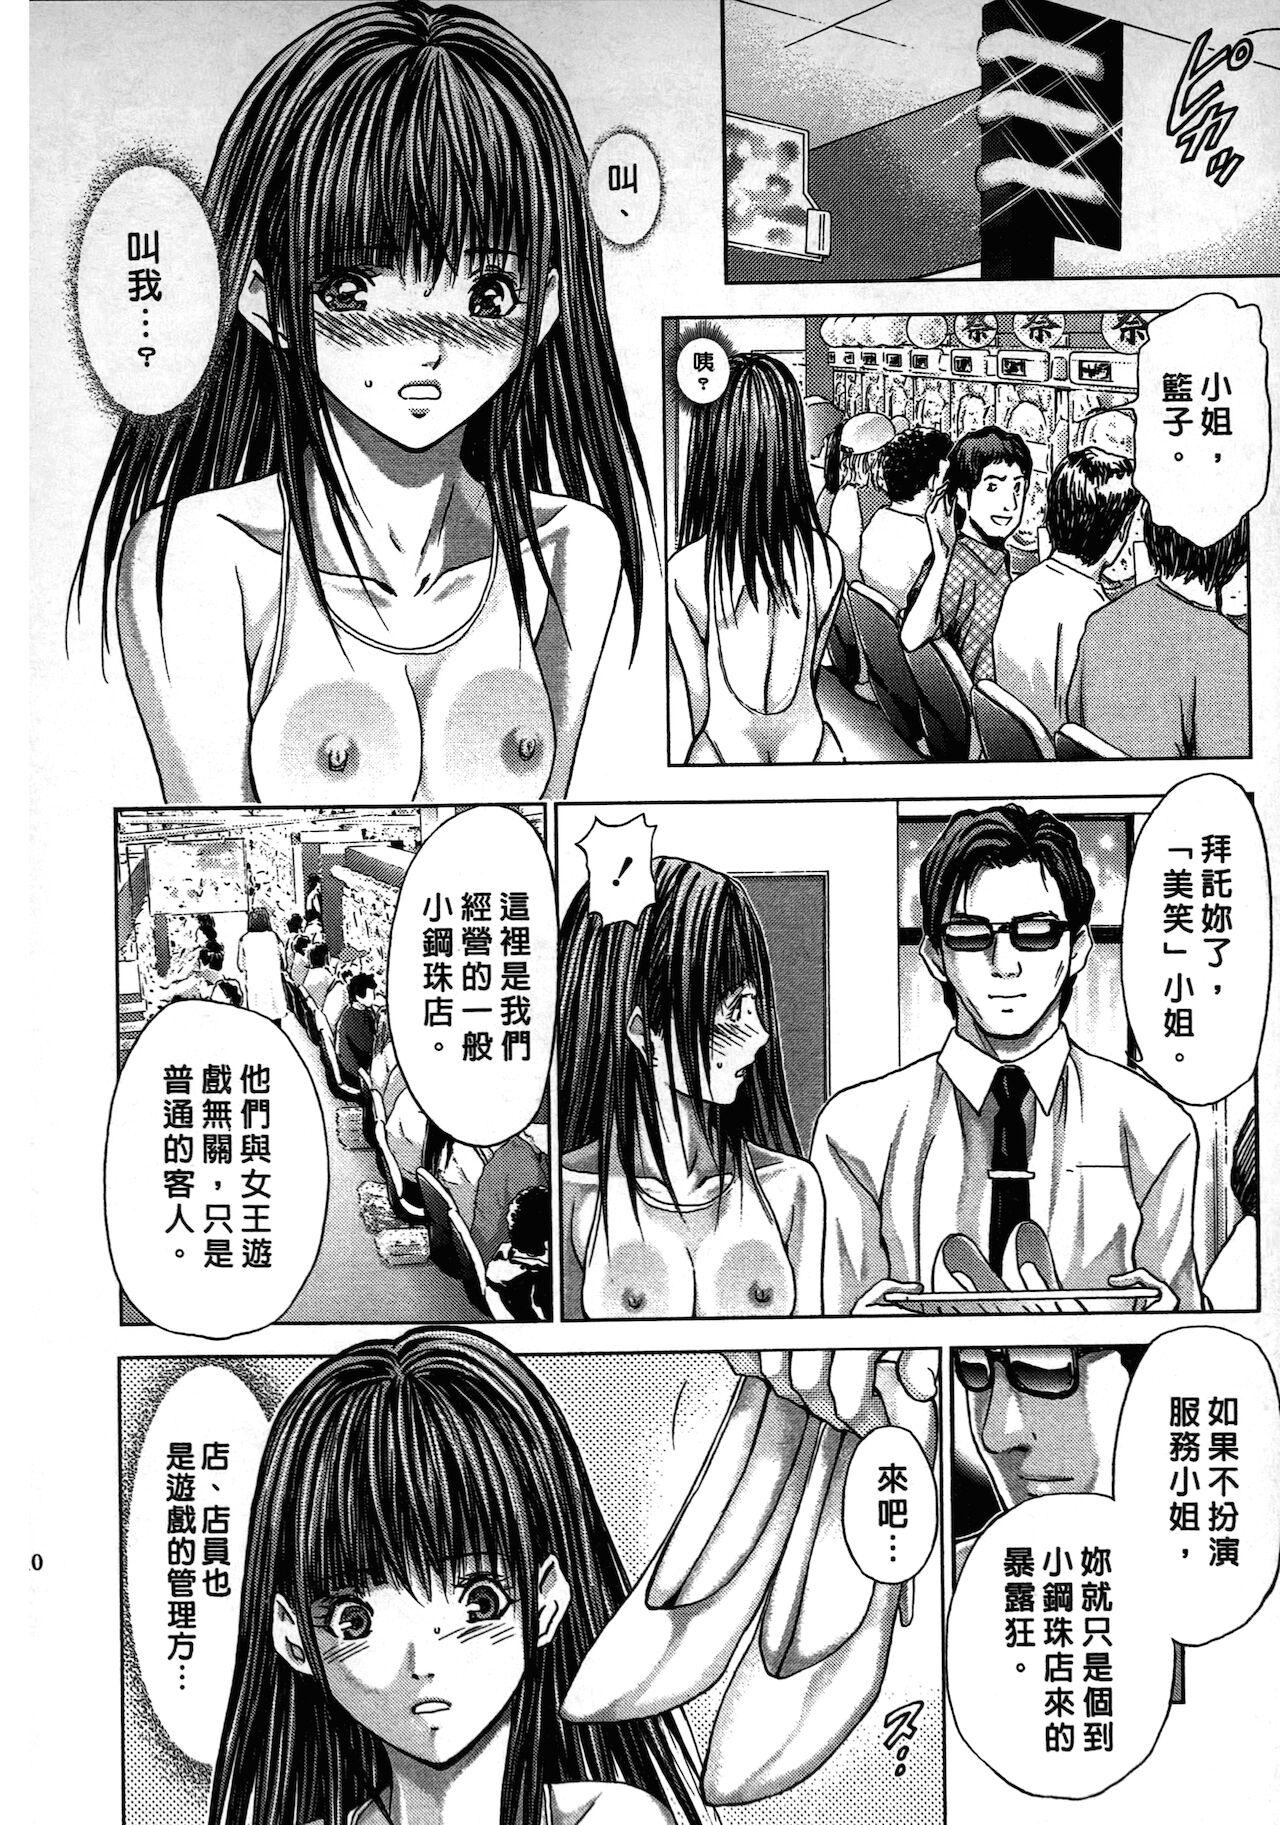 Stripper [Adachi Takumi] Queen's Game ~Haitoku no Mysterious Game~ 2 | 女王遊戲 ~背德的詭譎遊戲~ 2 [Chinese] Spy - Page 10